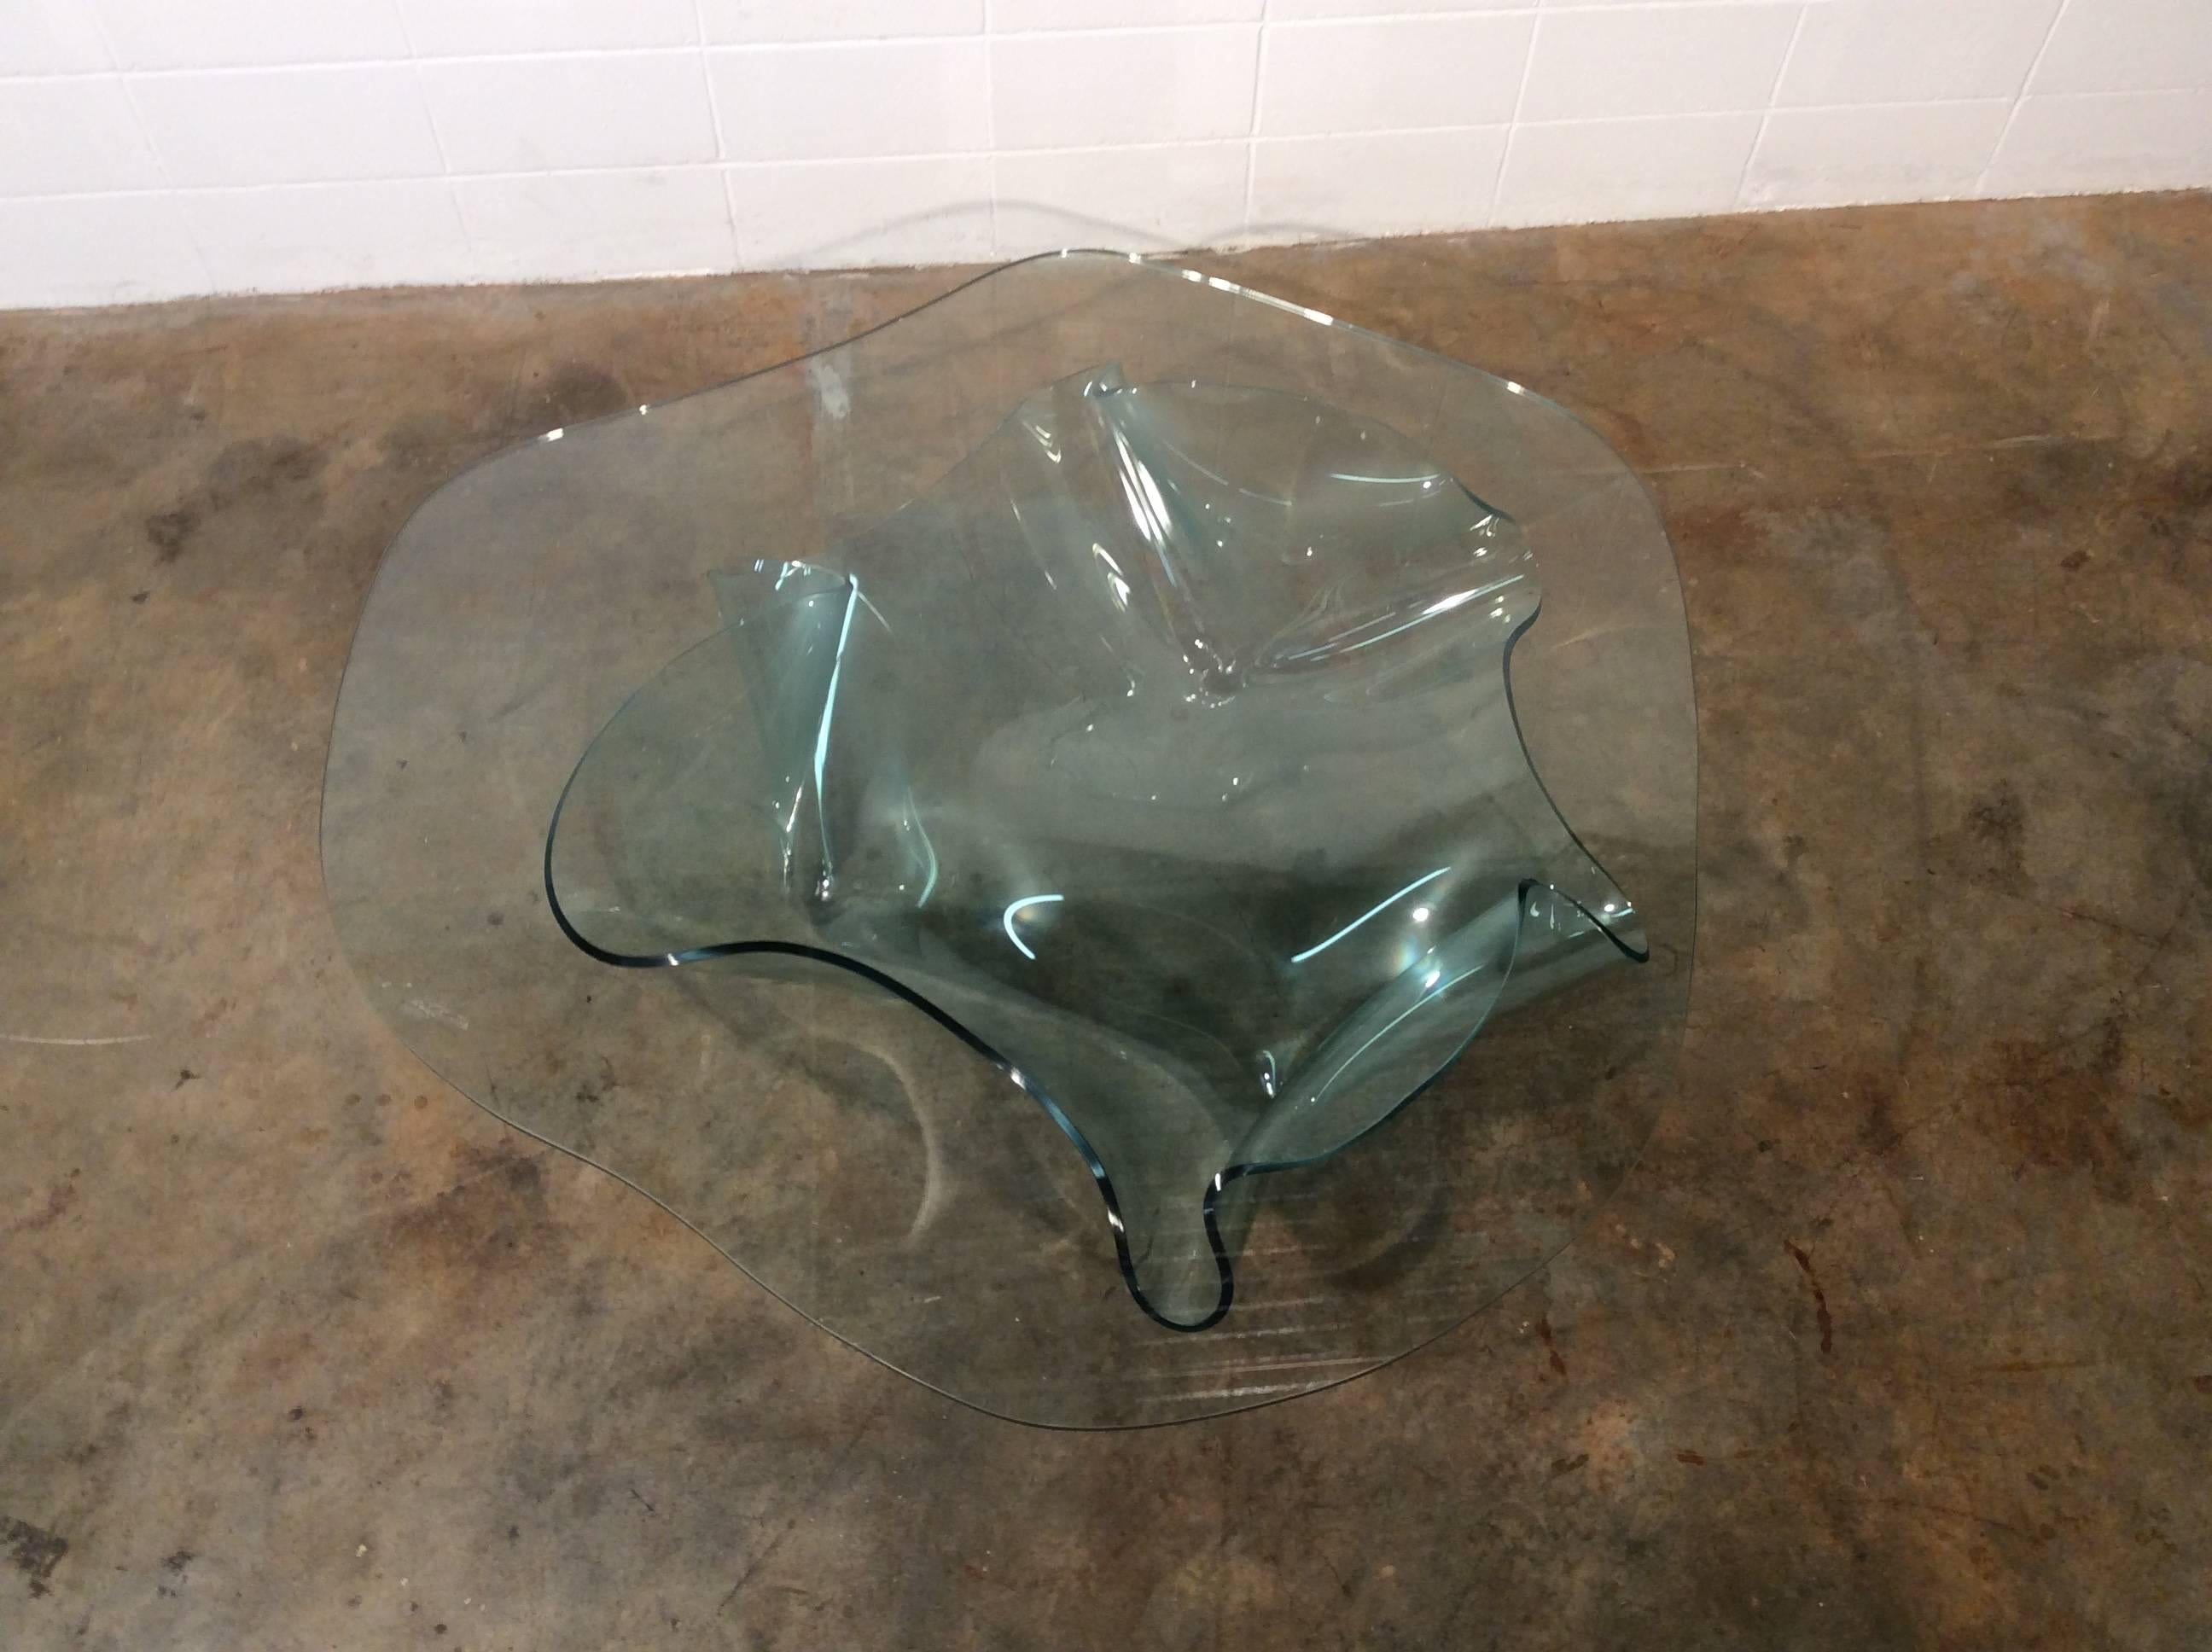 Monumental glass coffee table by The Late Laurel Fyfe, stunning designer item. Signed / dated / numbered
The late Laurel Fyfe was a widely respected artist and was known for her skills in glass works in the art world as well as well as the